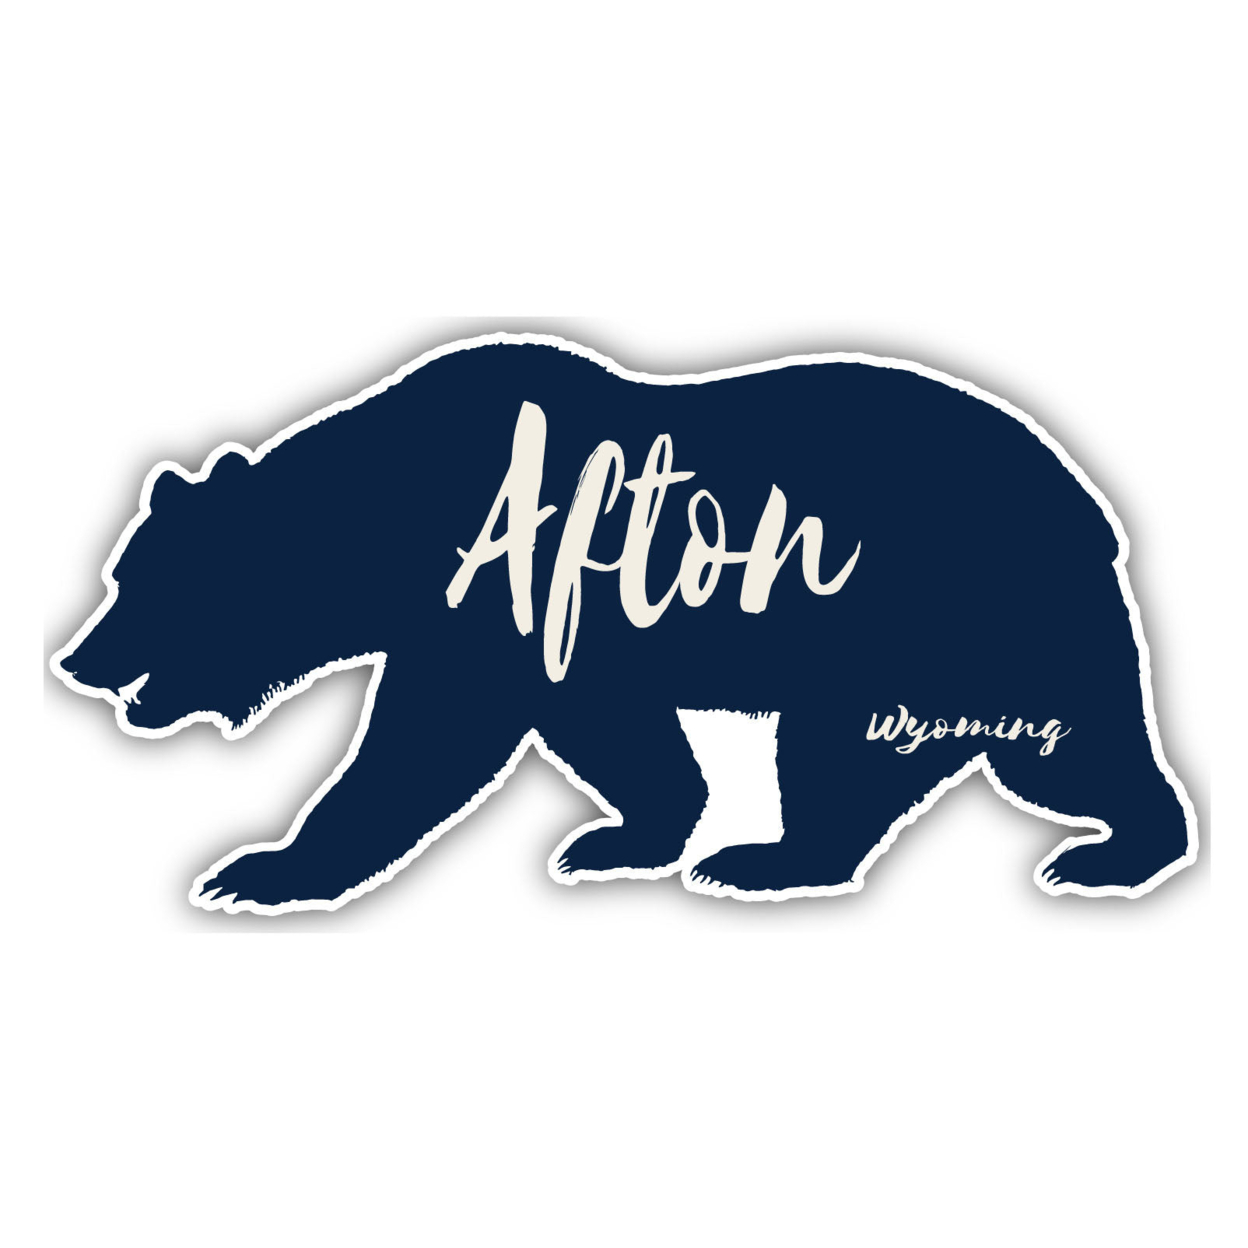 Afton Wyoming Souvenir Decorative Stickers (Choose Theme And Size) - 4-Pack, 6-Inch, Bear